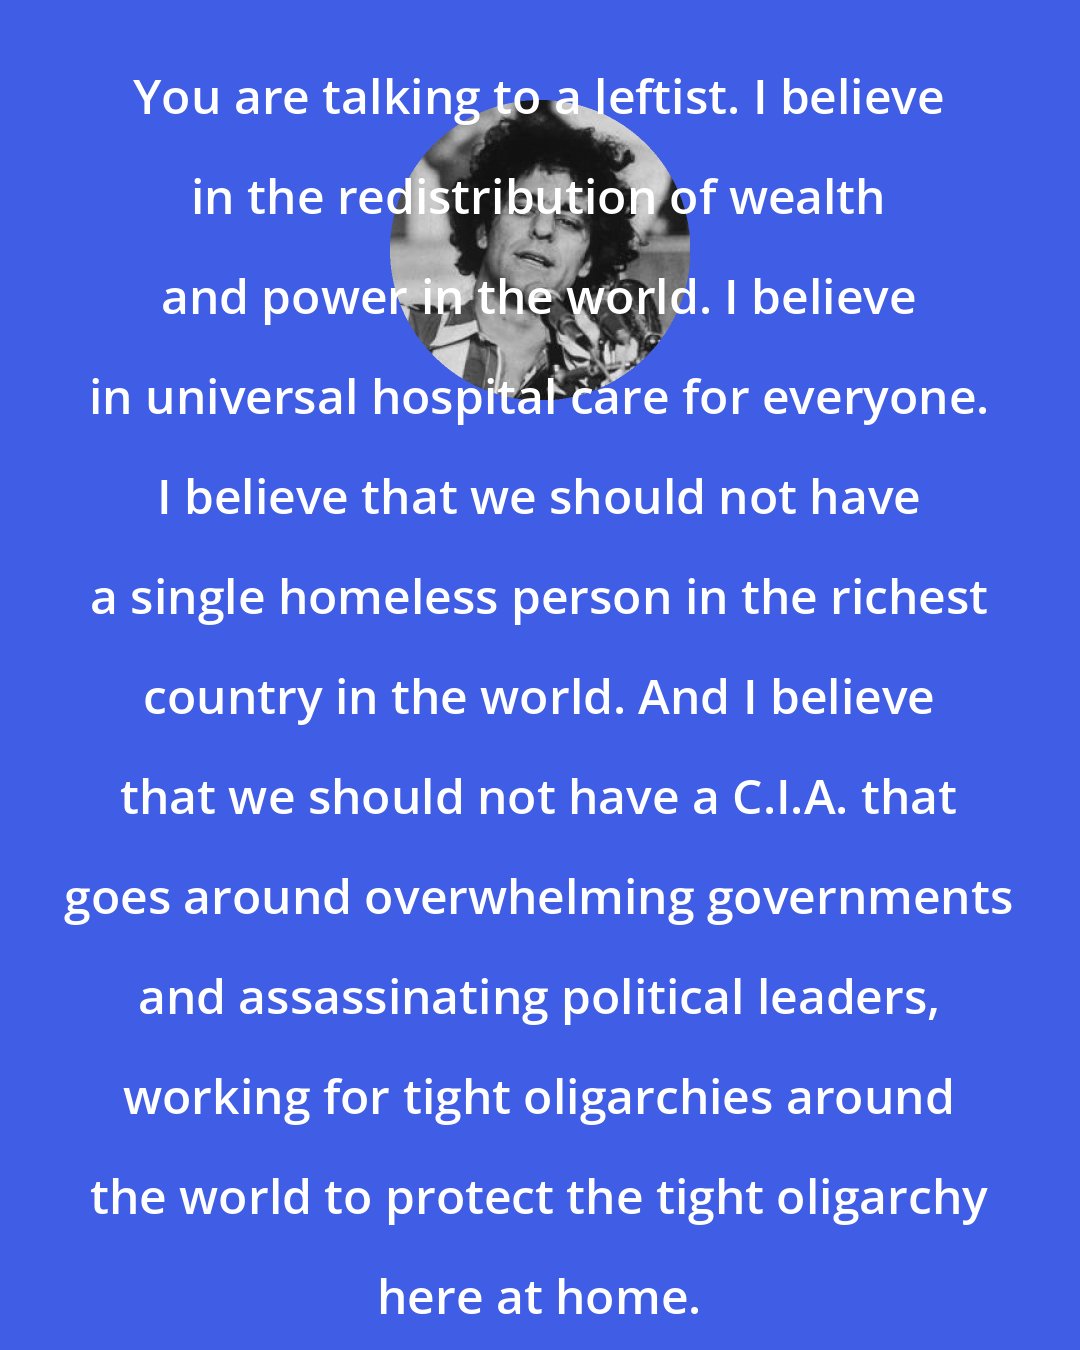 Abbie Hoffman: You are talking to a leftist. I believe in the redistribution of wealth and power in the world. I believe in universal hospital care for everyone. I believe that we should not have a single homeless person in the richest country in the world. And I believe that we should not have a C.I.A. that goes around overwhelming governments and assassinating political leaders, working for tight oligarchies around the world to protect the tight oligarchy here at home.